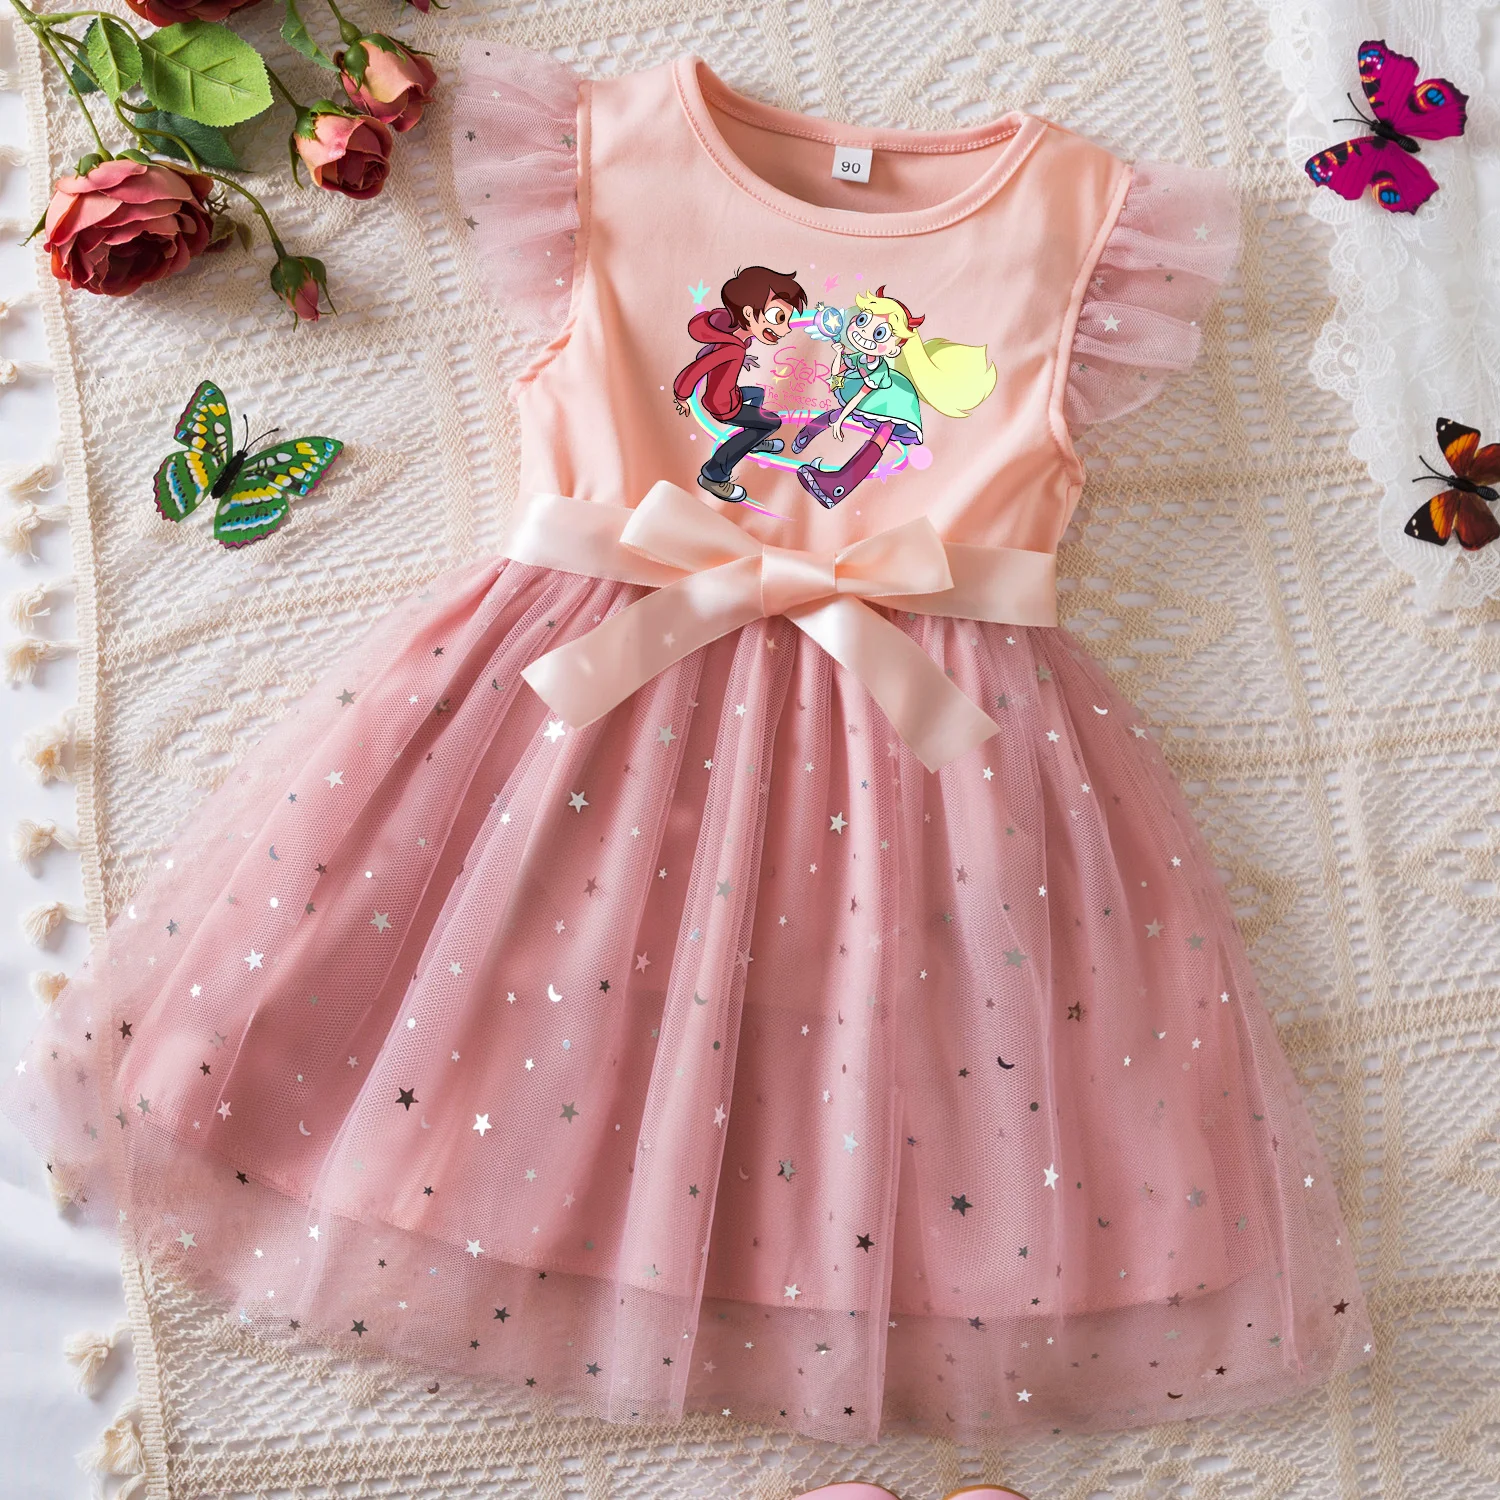 

Star vs. the Forces of Summer Toddler Girl Dress Princess Star Baby Girls Clothes Tulle Tutu Dress for Children Party Dress 2-6Y